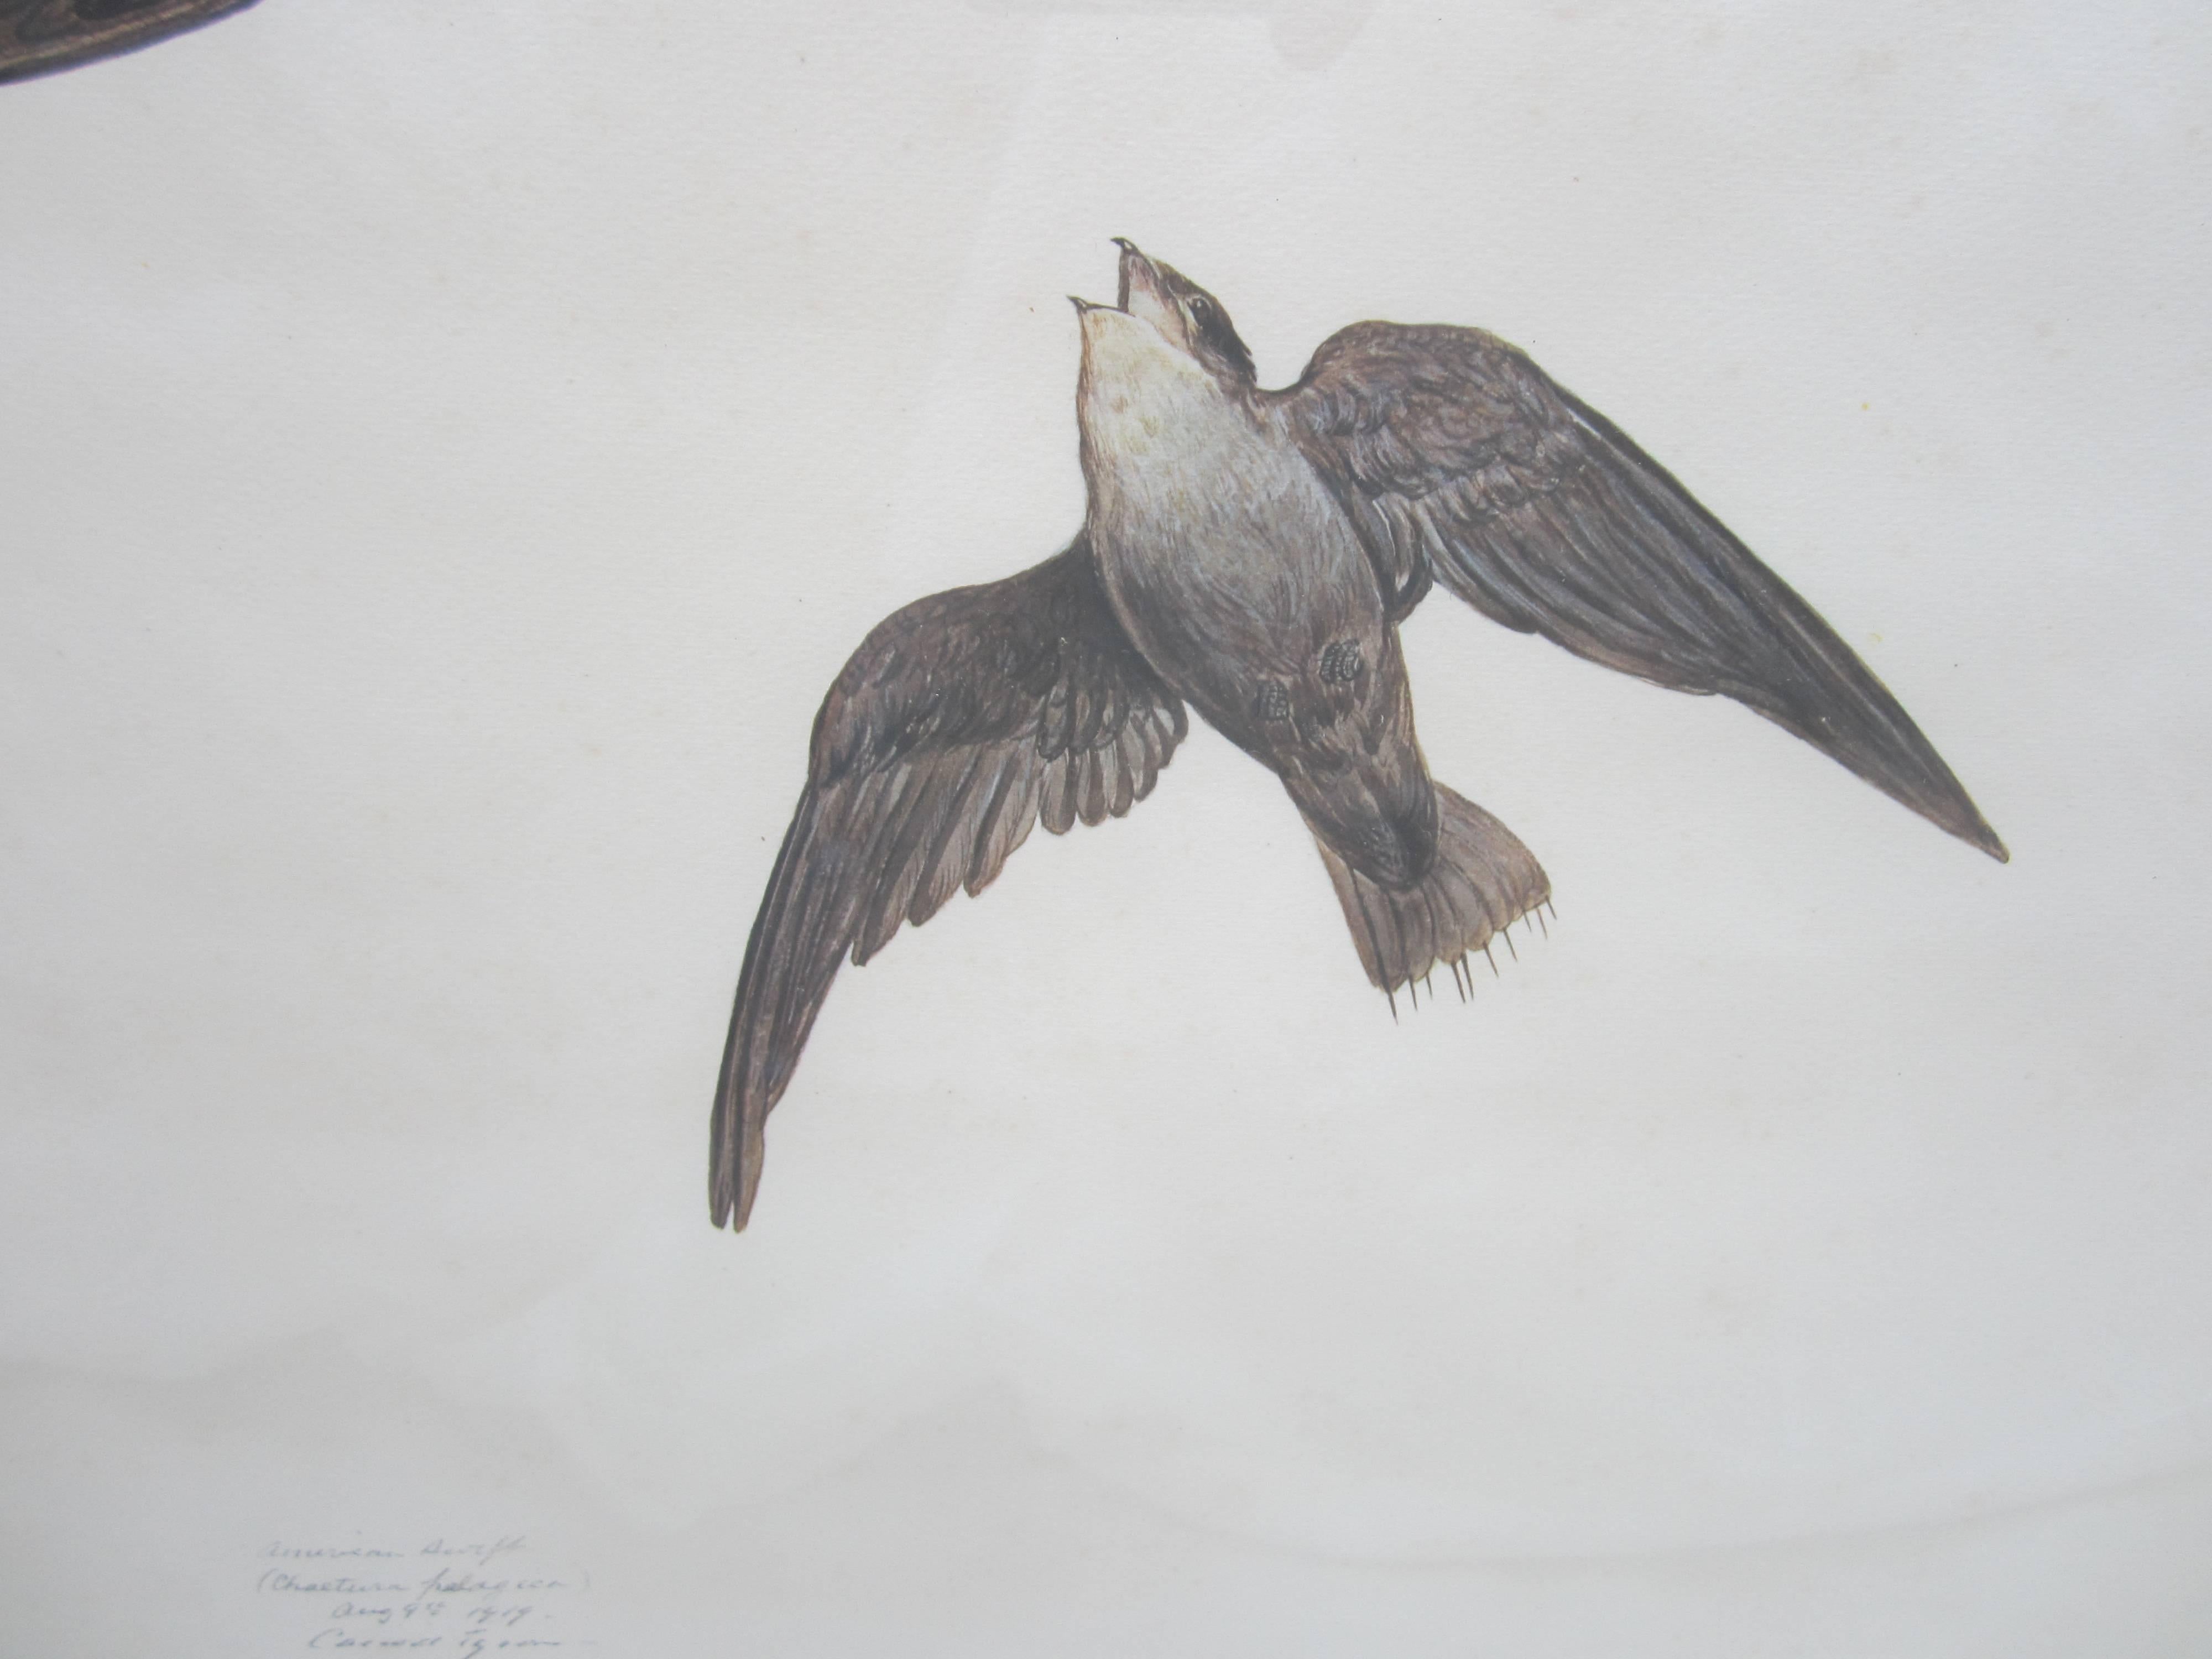 Early 20th Century American Swift 'Chaetura Pelagica' Print by Carroll Sargent Tyson